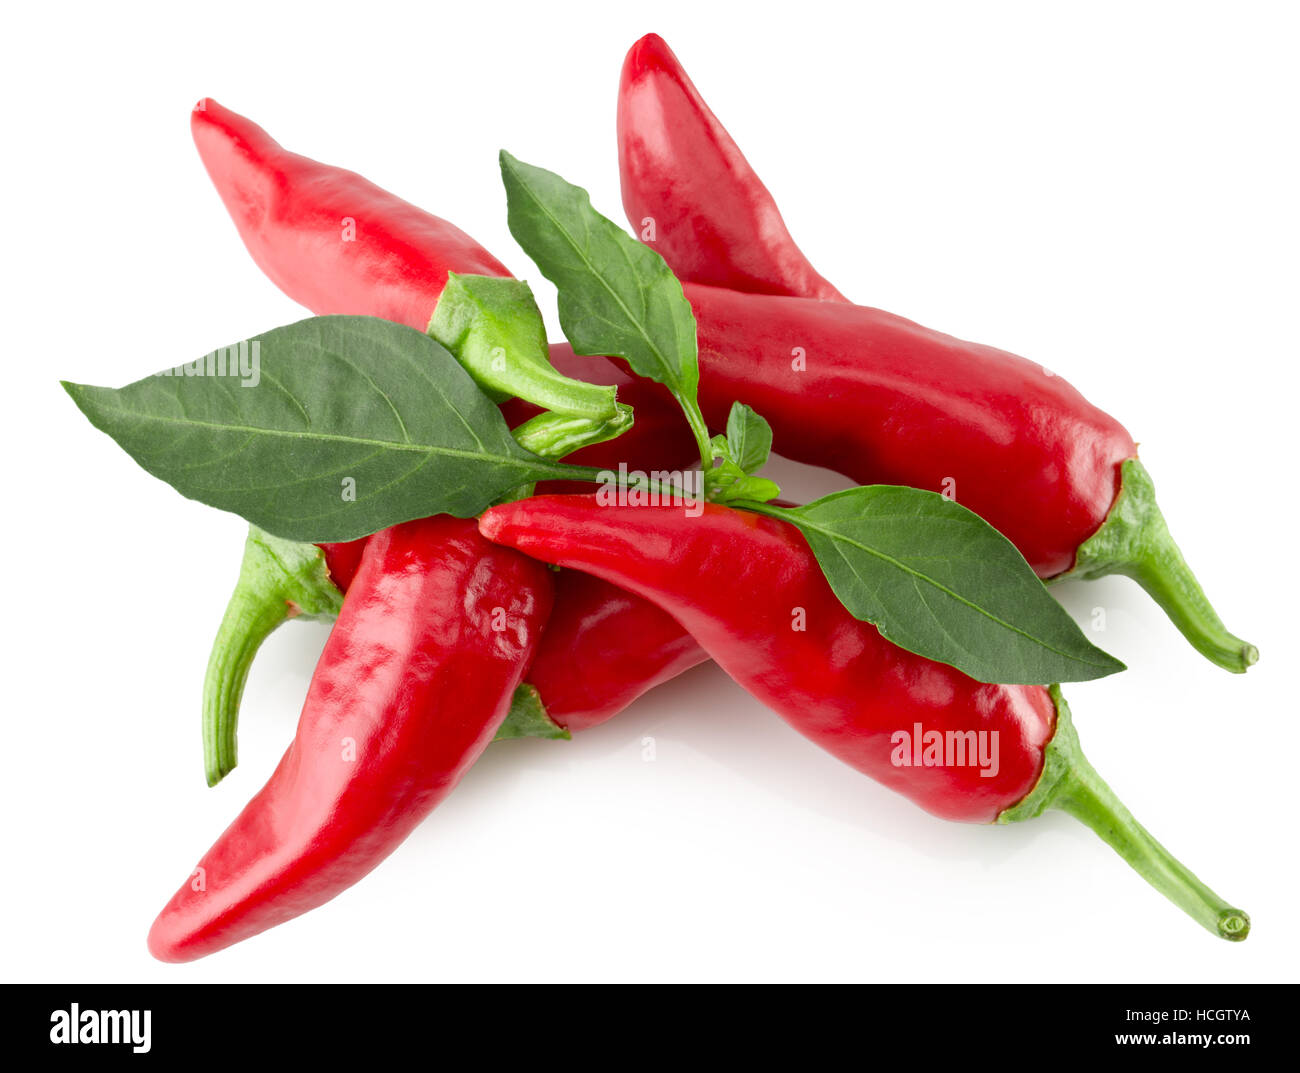 red chili pepper isolated on the white background. Stock Photo